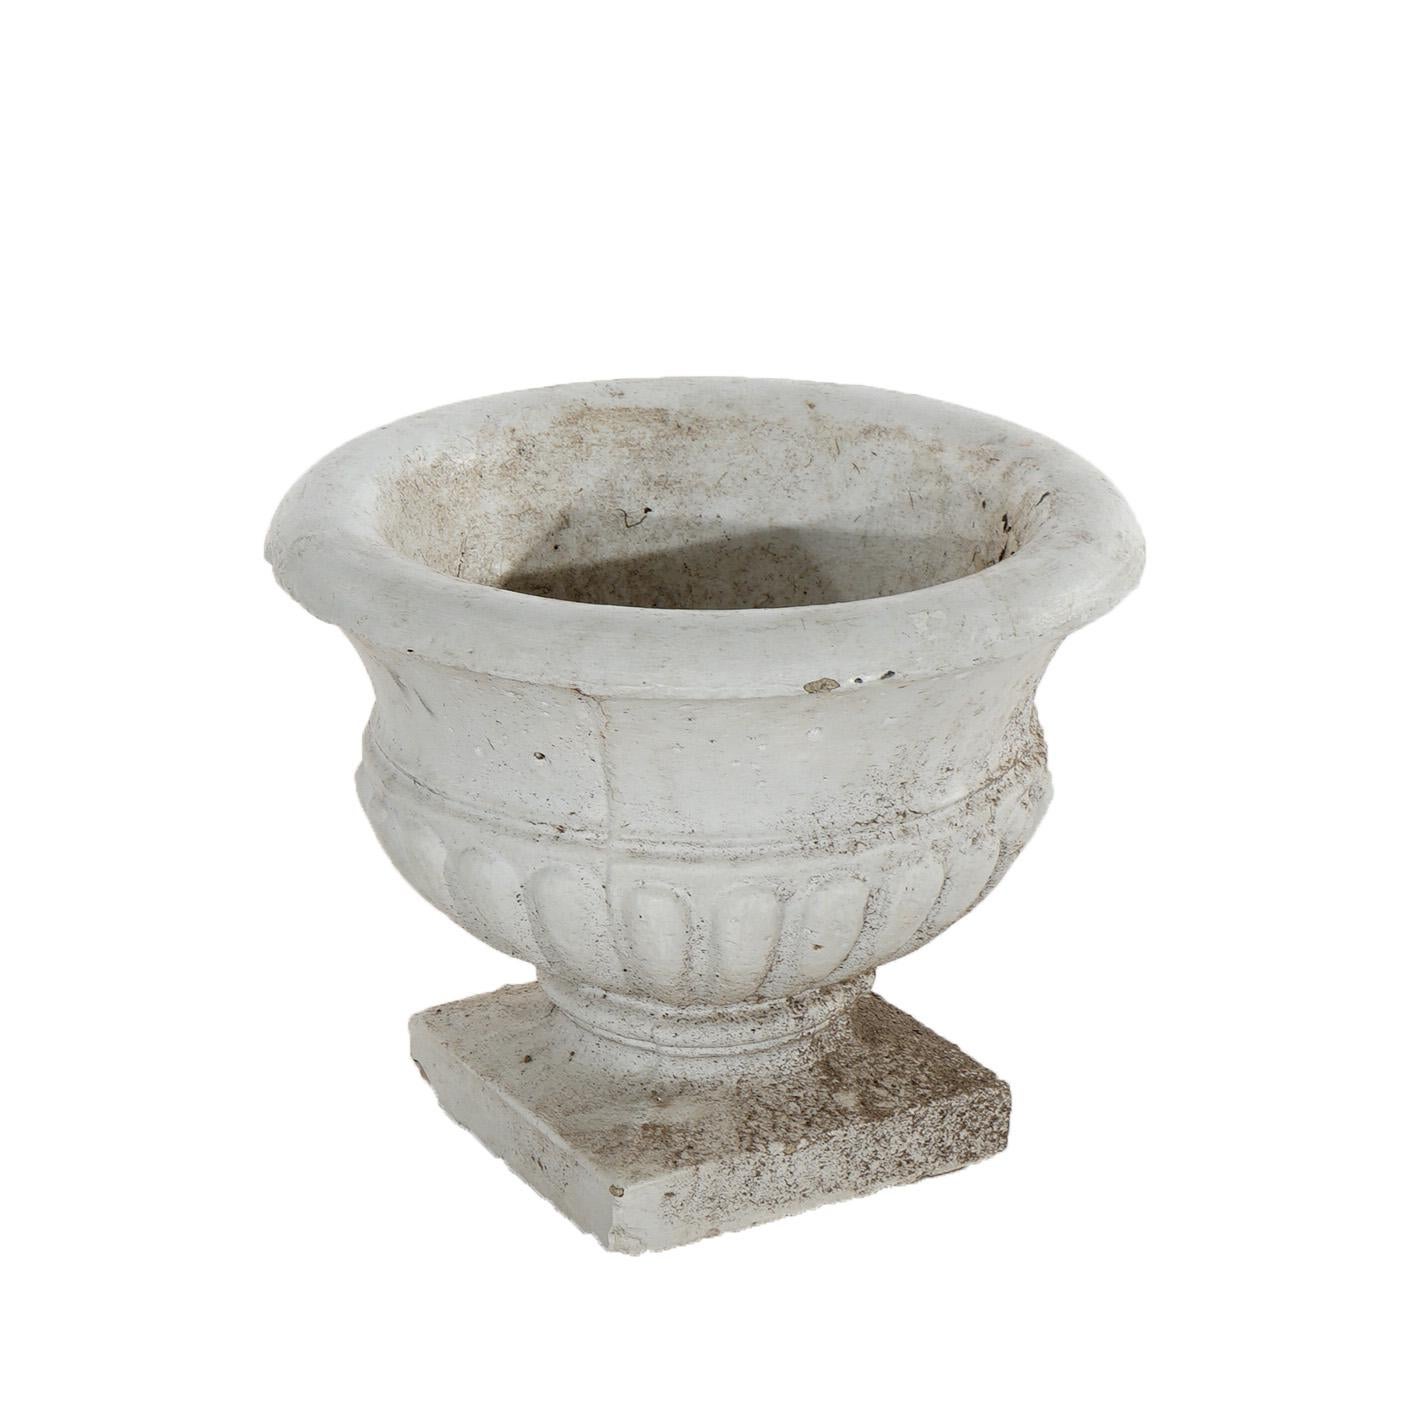 ***Ask About Reduced In-House Shipping Rates - Reliable Service & Fully Insured***
Classical Painted Cast Hardstone Mellon Bowl Garden Urn 20th C

Measures- 12''H x 14.5''W x 14.5''D
